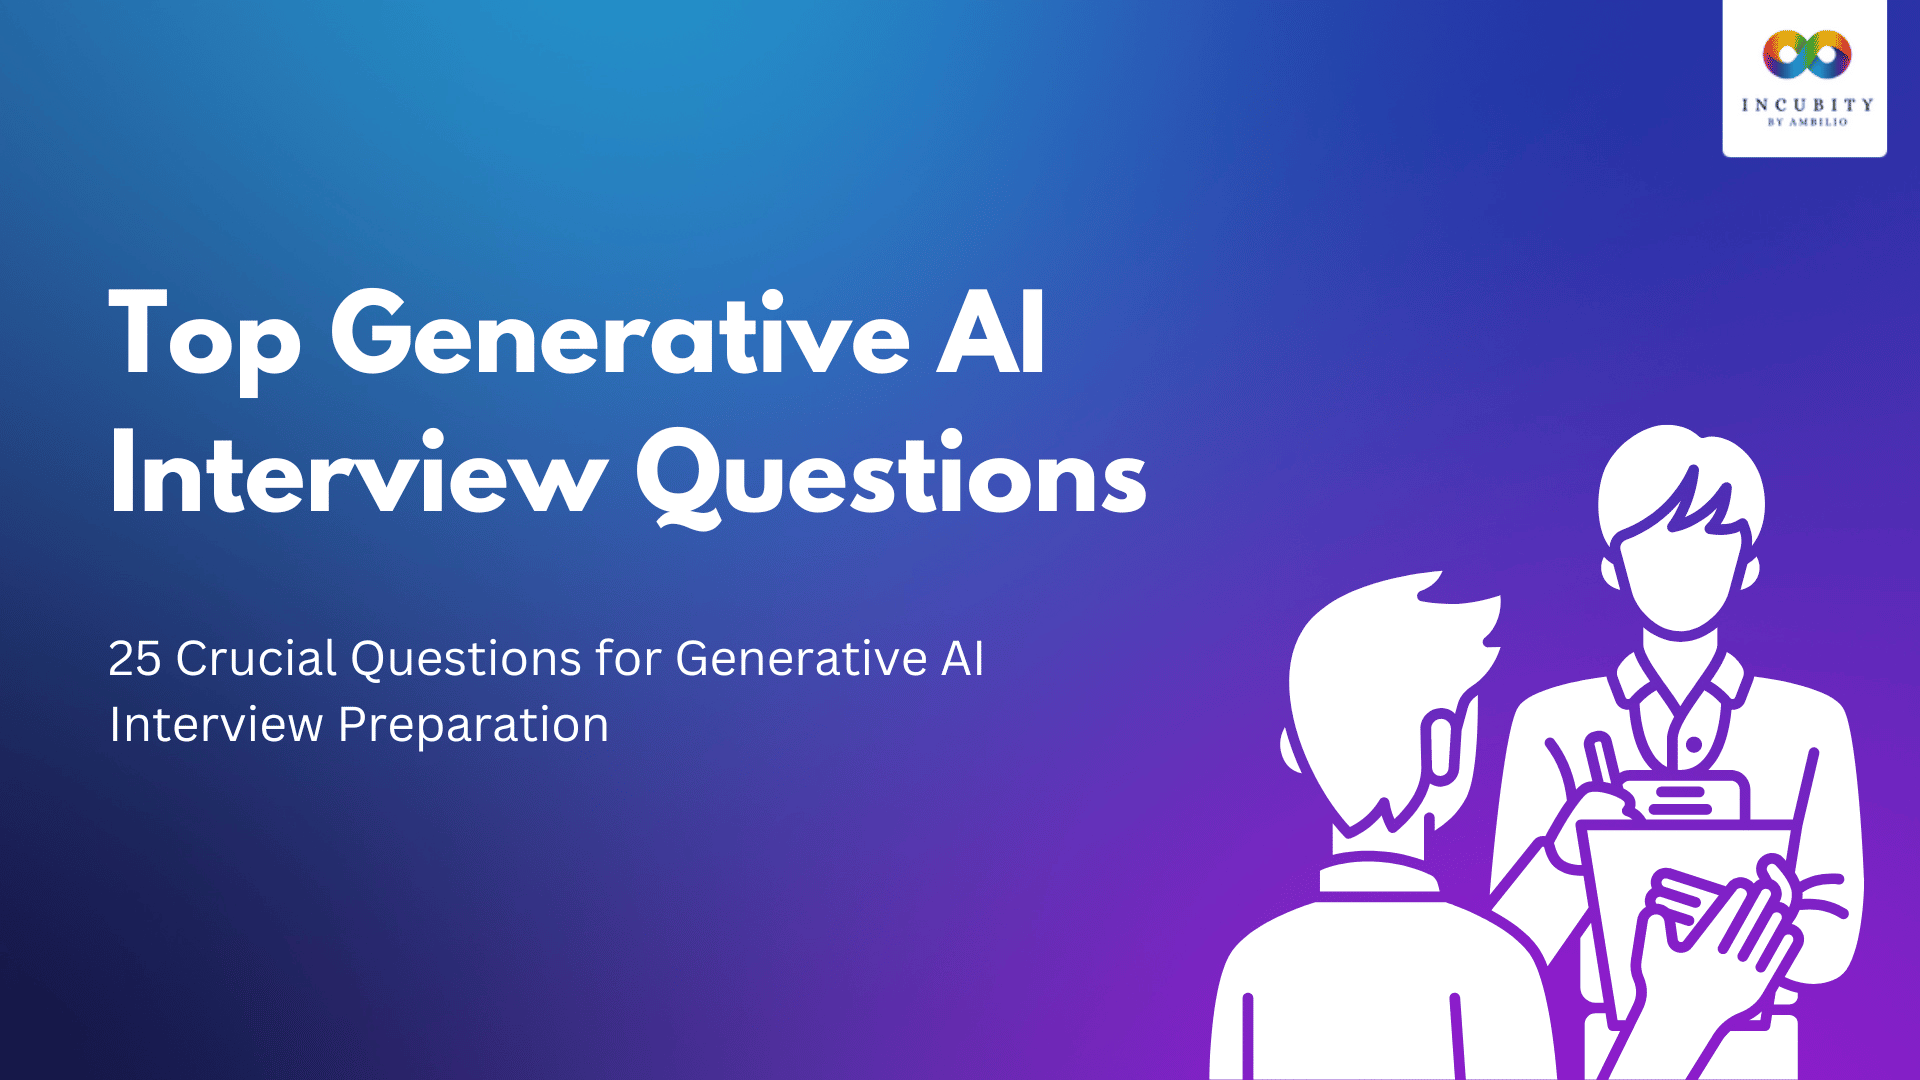 25 Crucial Questions for Generative AI Interview Preparation